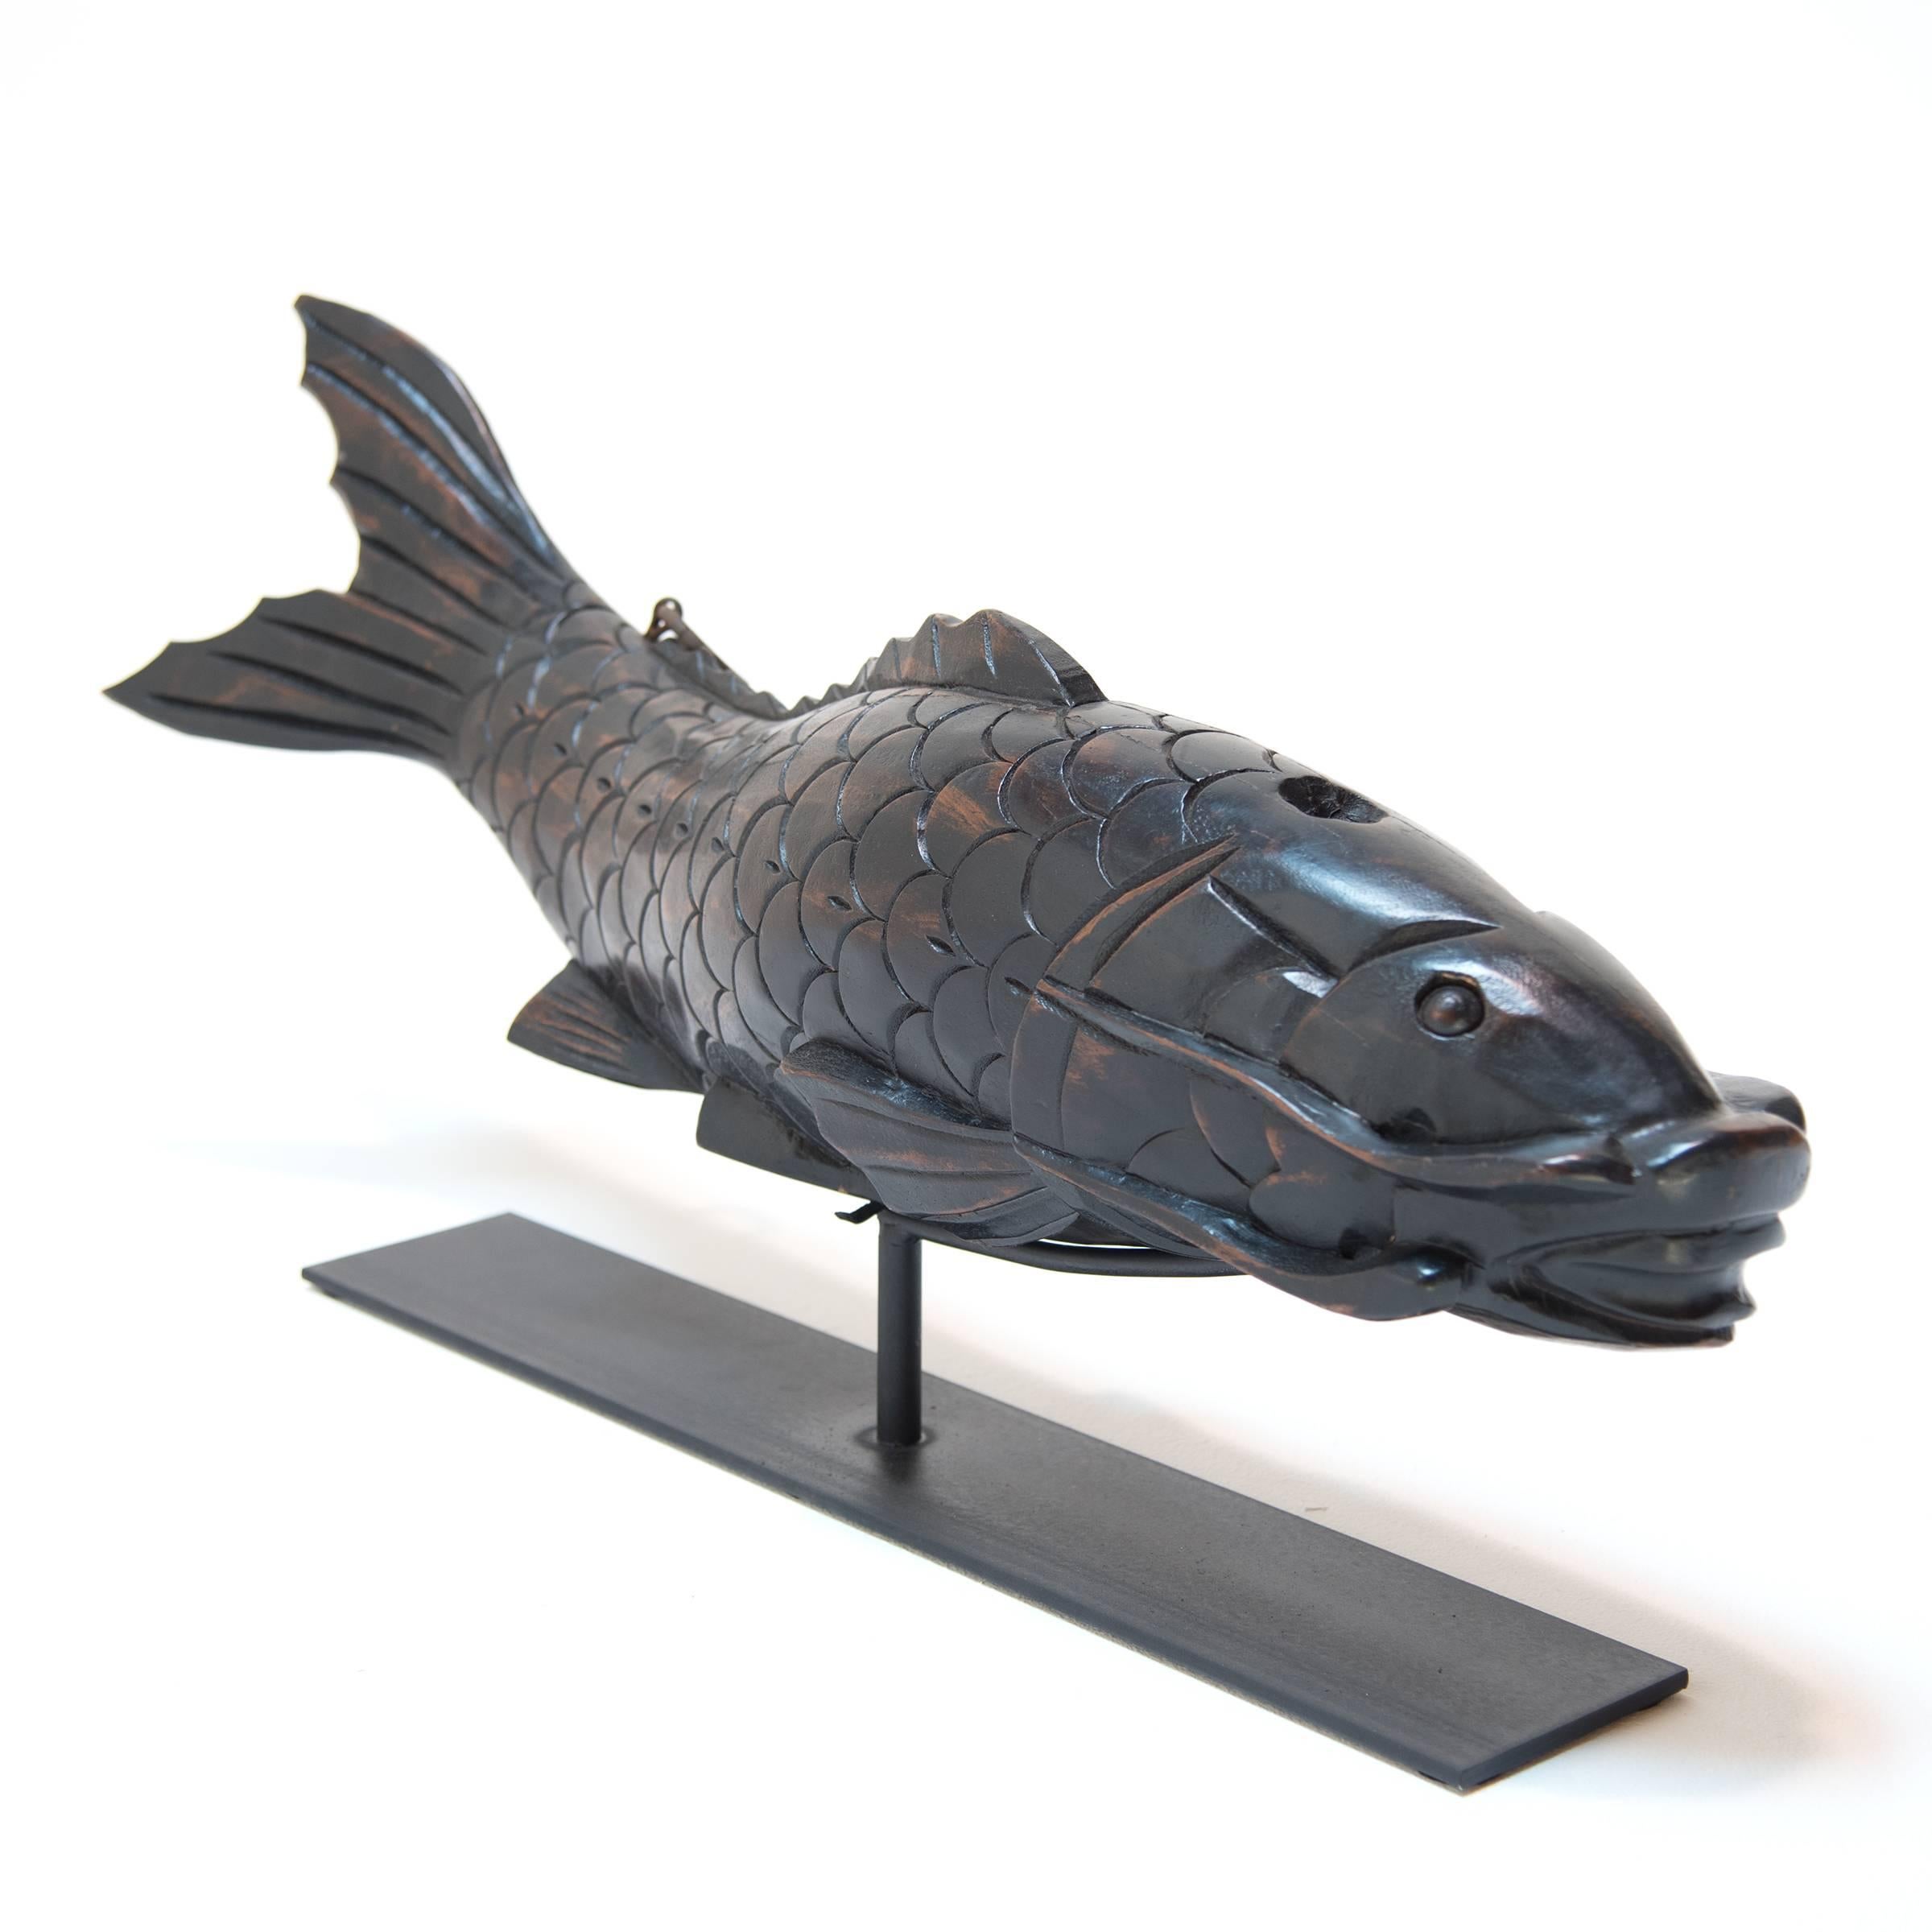 This 19th century carved koi was originally hung outside a fish market as a shop sign.  It has intricately carved scales and whiskers and is mounted on a custom iron stand.  We love it for its fluid expression.